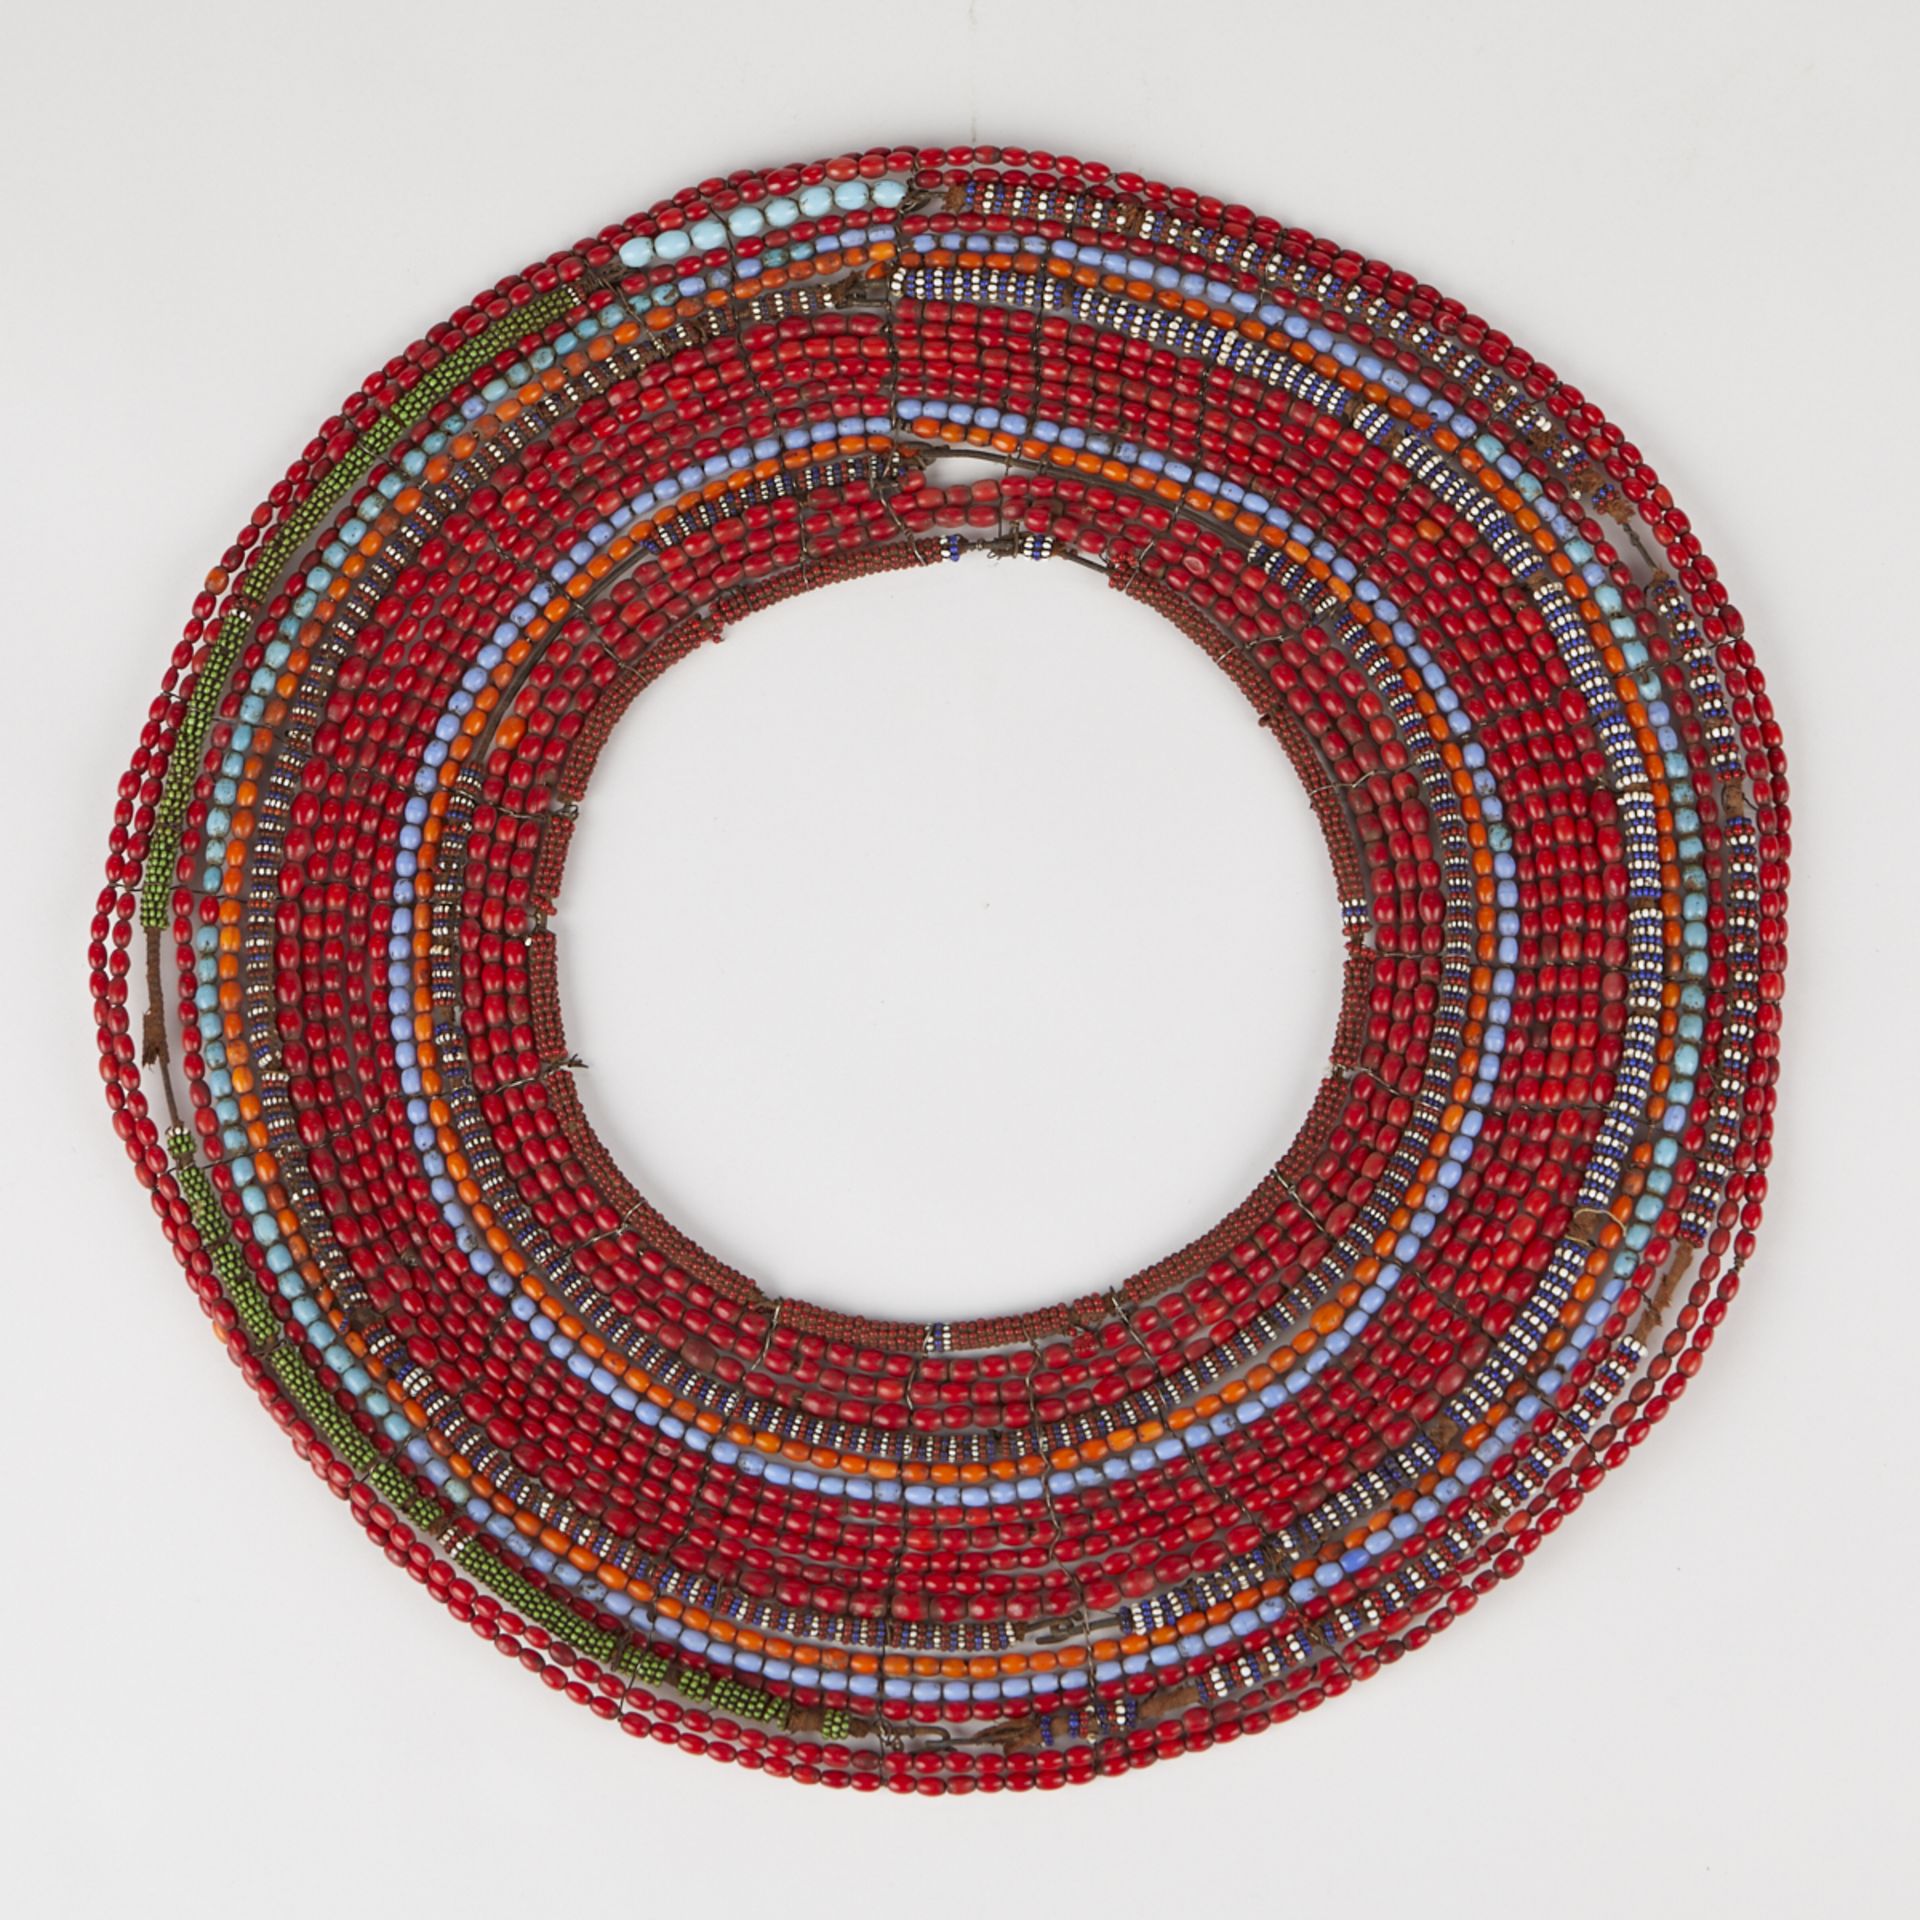 3 Collar Necklaces - 2 African and 1 New Guinea - Image 2 of 10